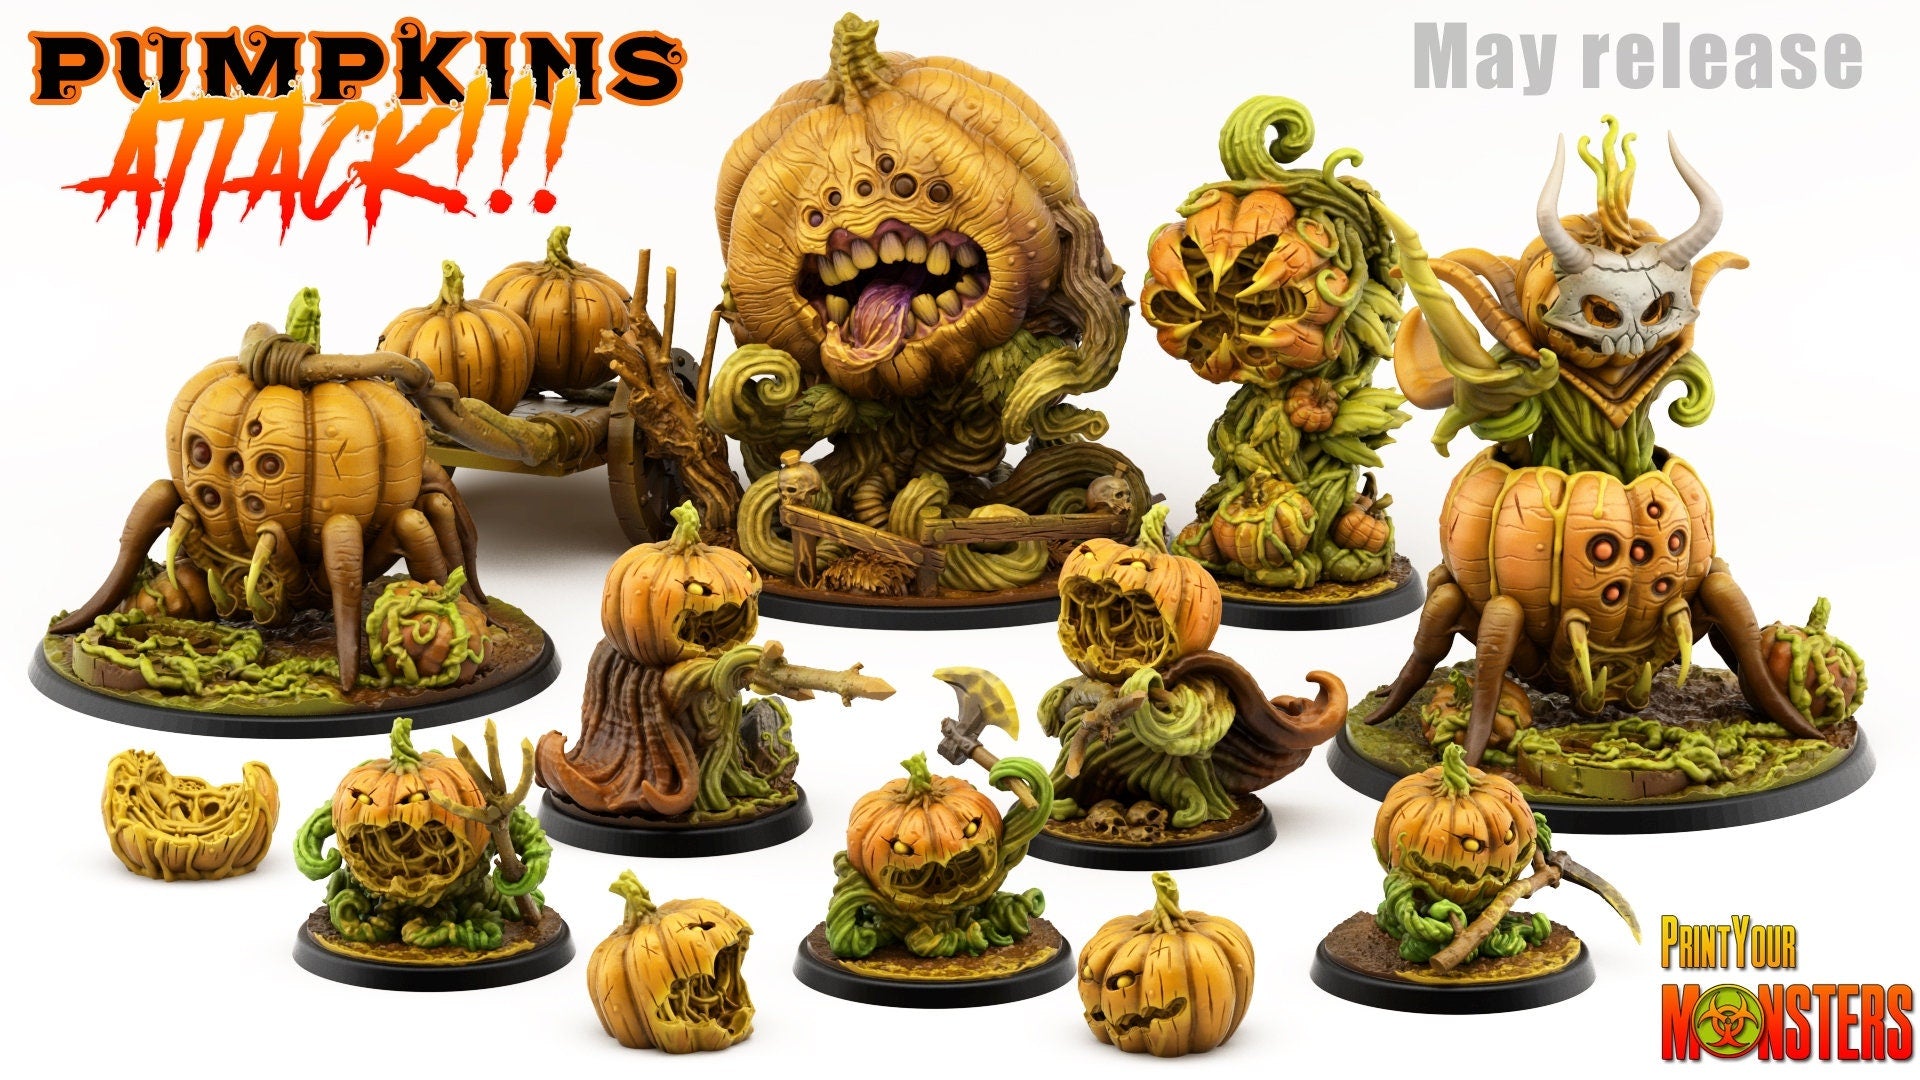 Pumpkin Lord - Print Your Monsters 